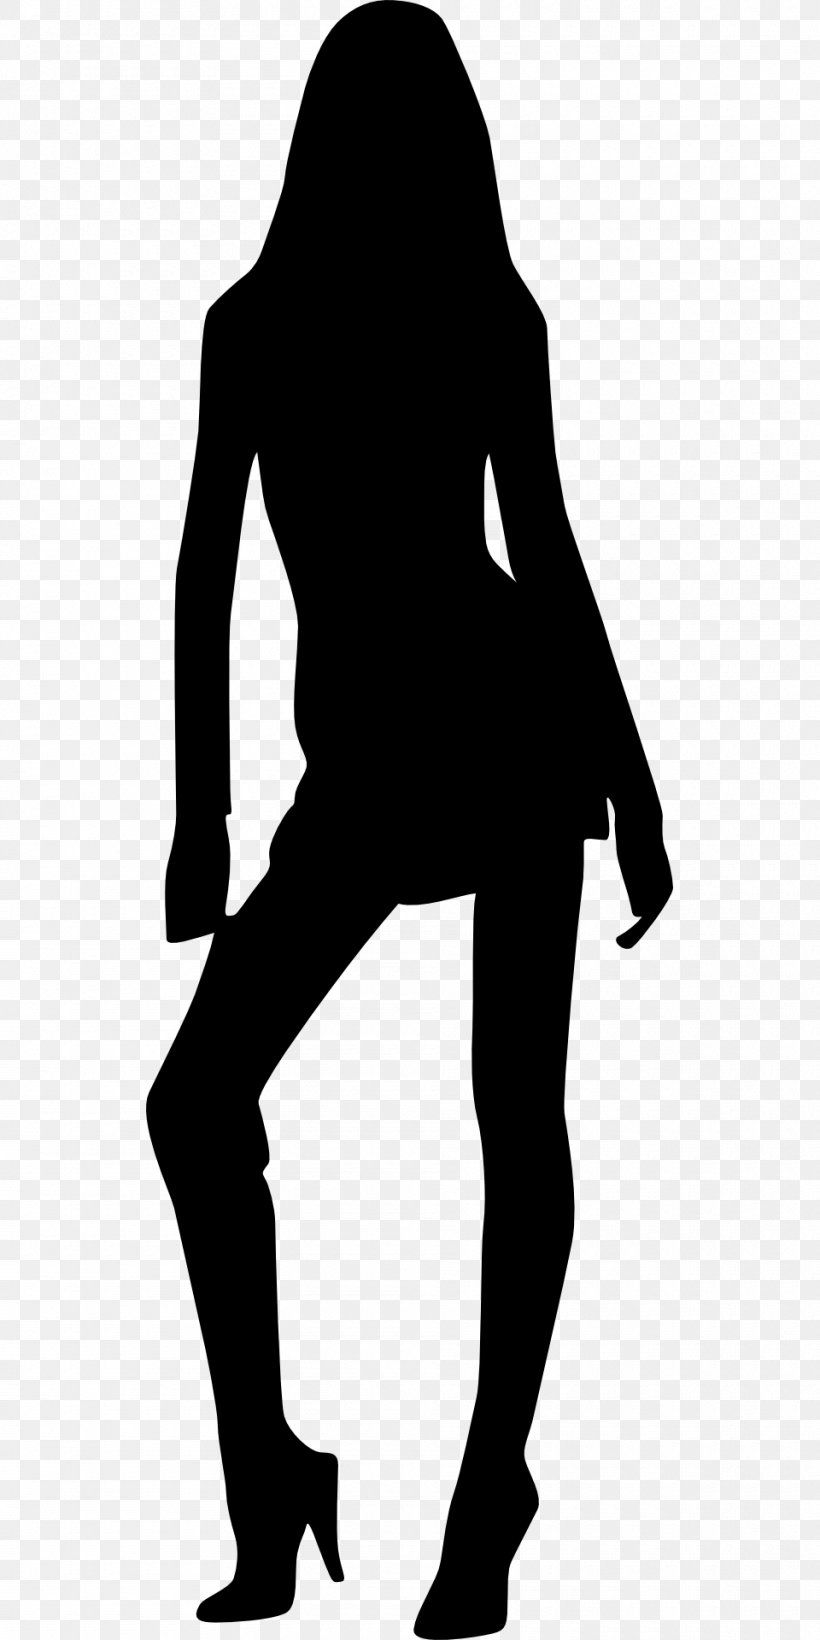 Silhouette Woman Clip Art, PNG, 960x1920px, Silhouette, Arm, Black, Black And White, Drawing Download Free